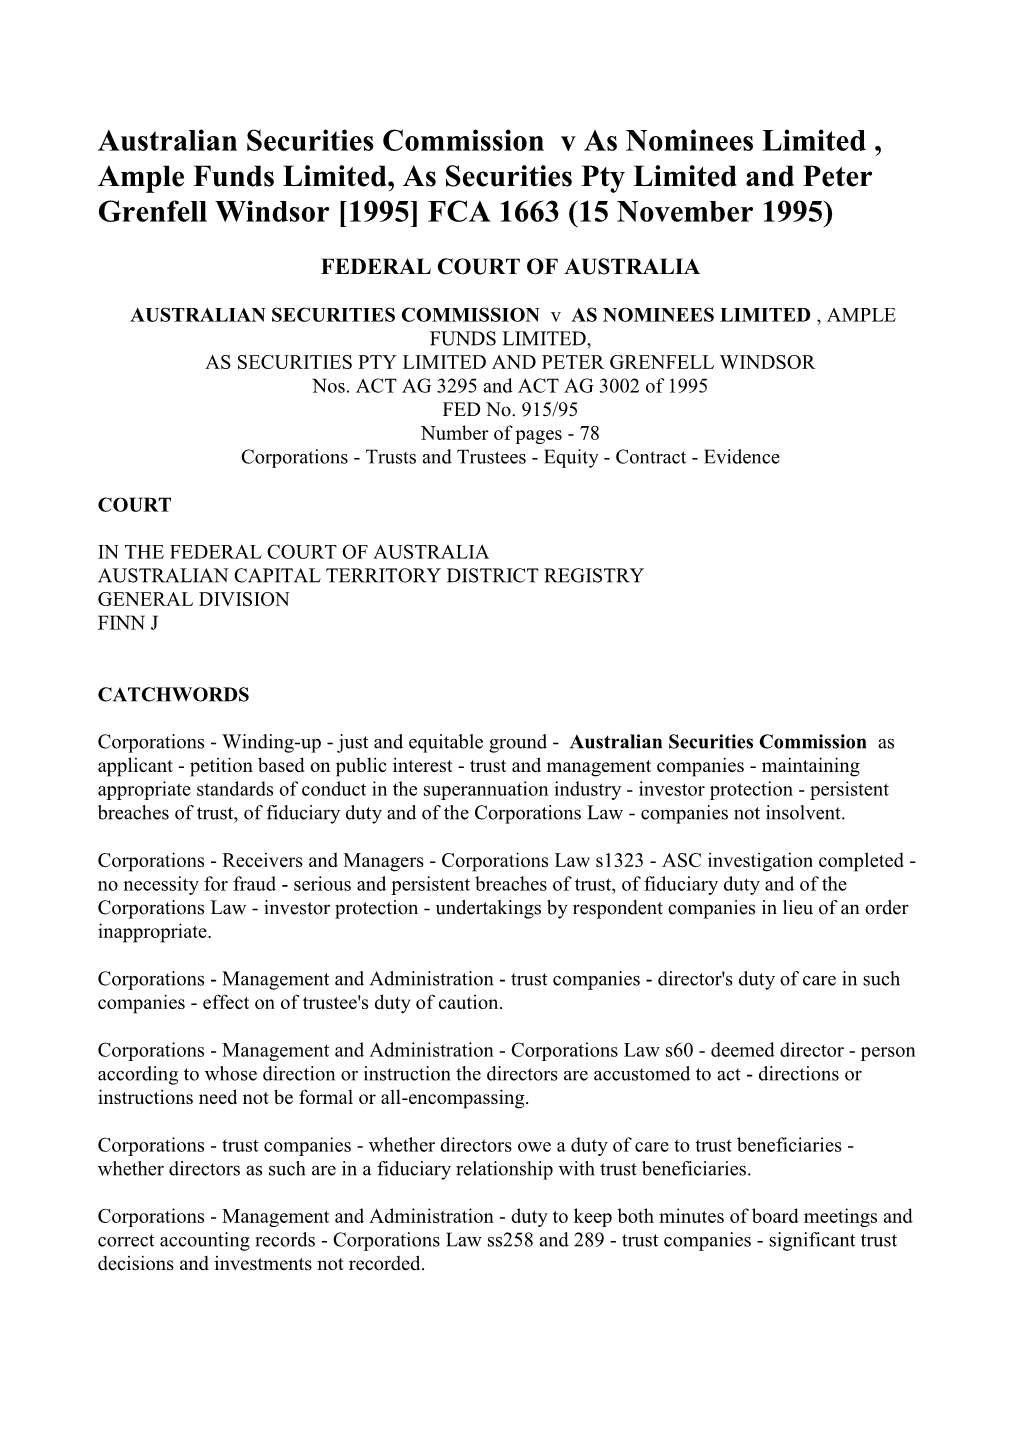 Australian Securities Commission V As Nominees Limited , Ample Funds Limited, As Securities Pty Limited and Peter Grenfell Windsor [1995] FCA 1663 (15 November 1995)